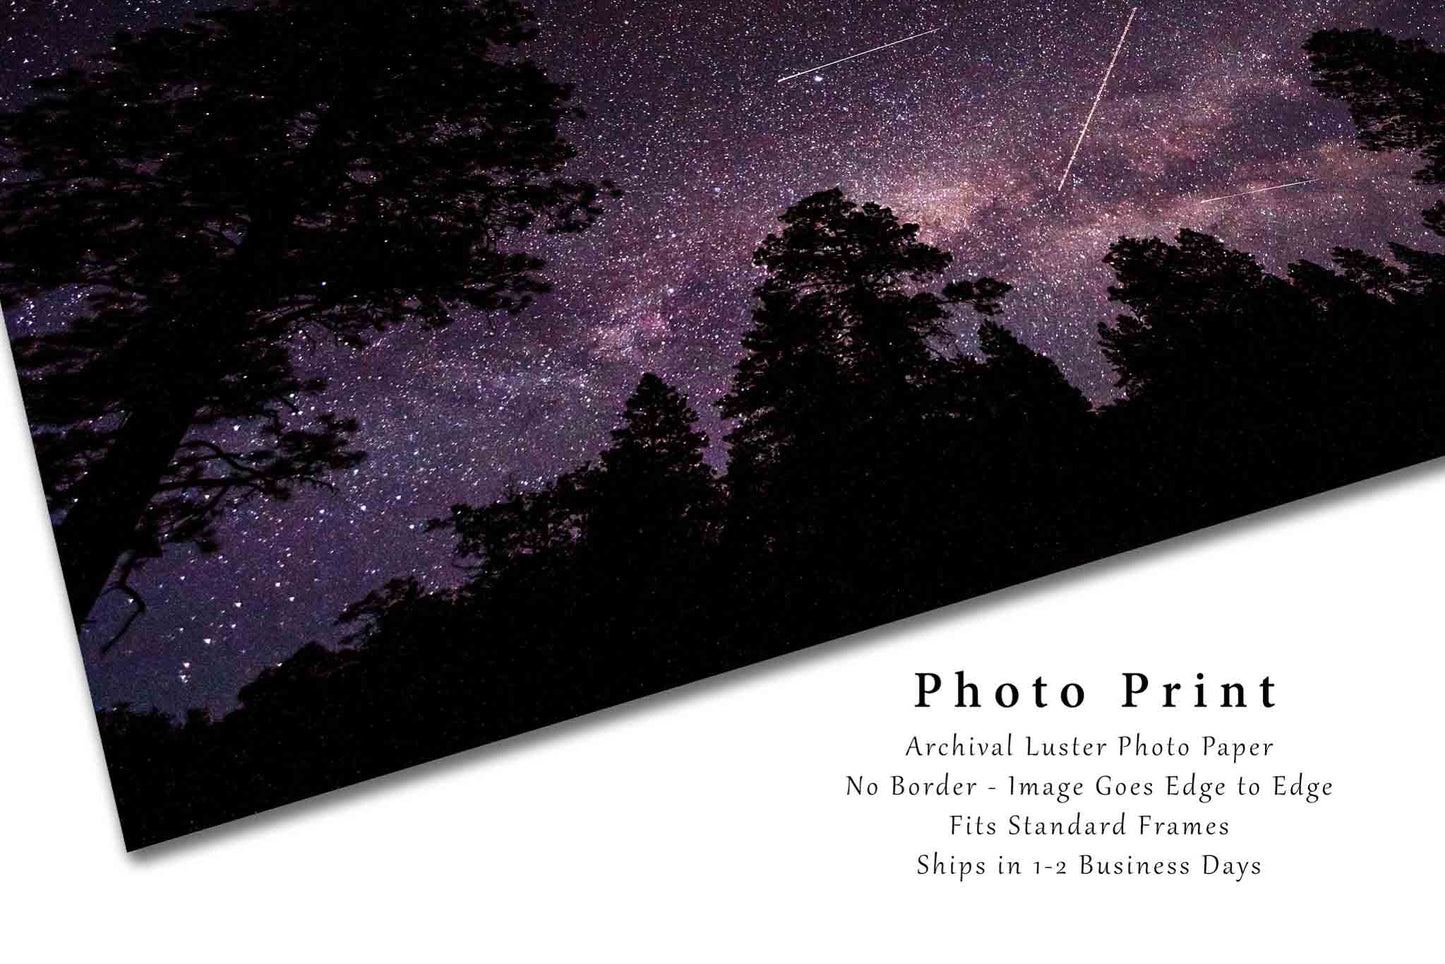 Night Sky Photography Print | Shooting Star, Plane and Satellite Picture | Rocky Mountain Wall Art | Colorado Photo | Celestial Decor | Not Framed